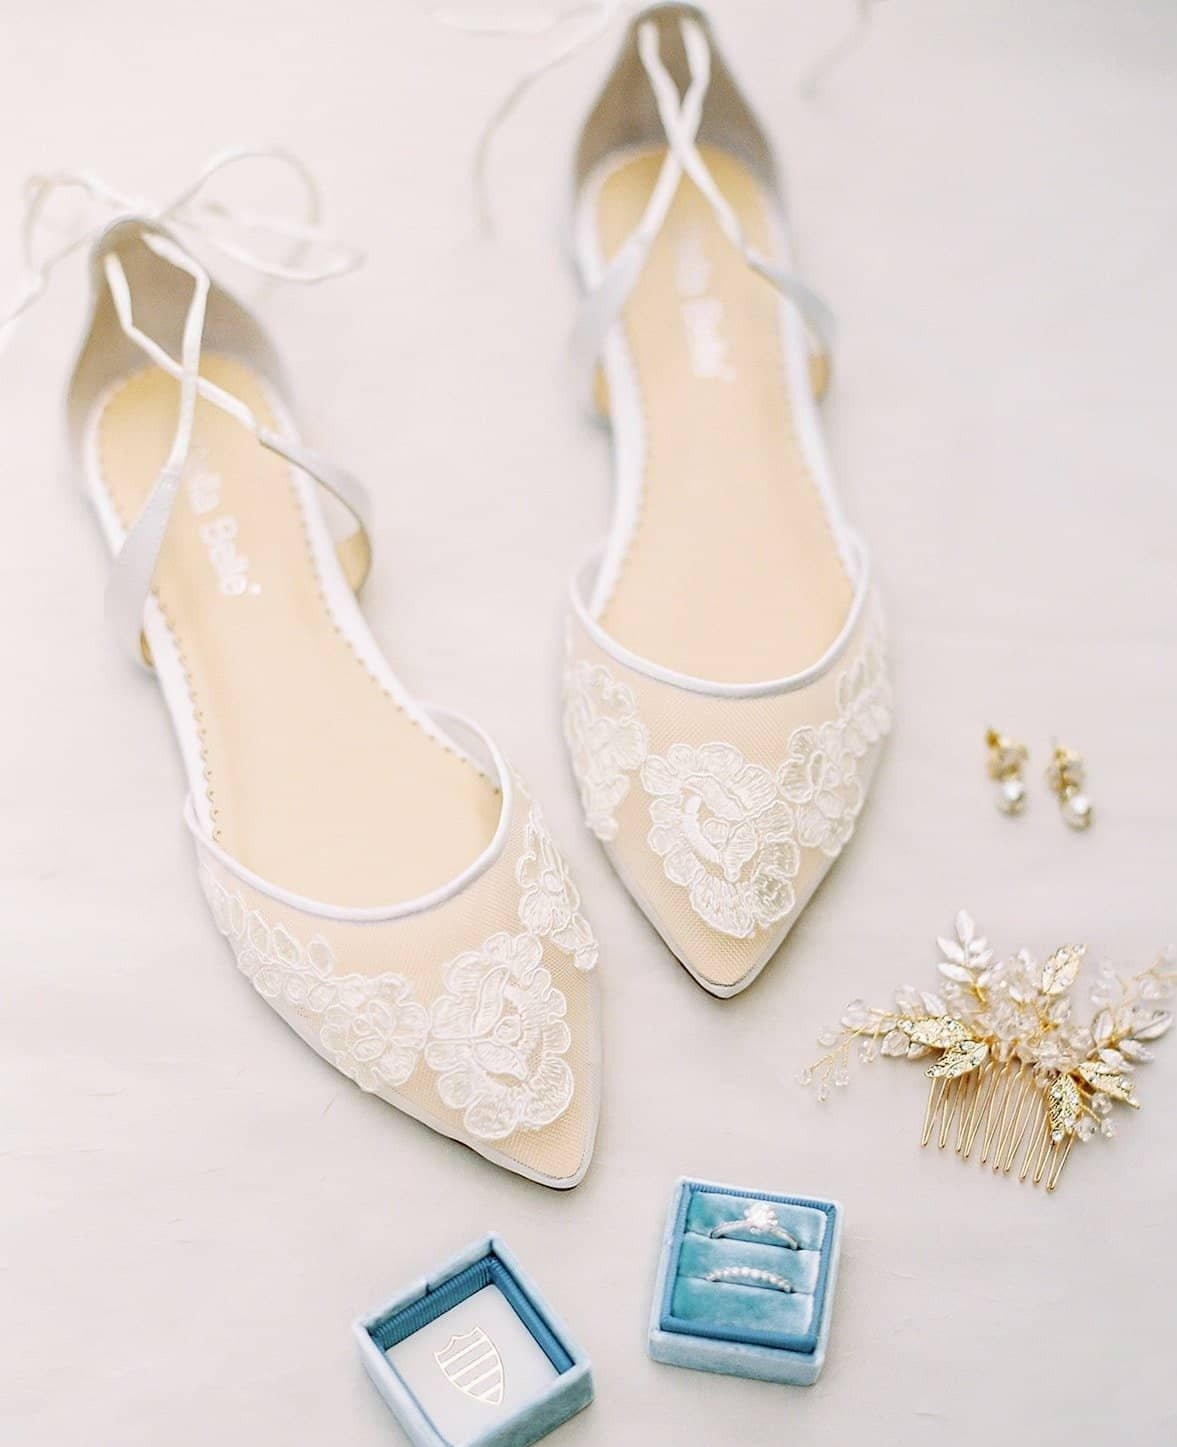 Alicia Ballerina Lace Wedding Heels in Ivory by Bella Belle Shoes